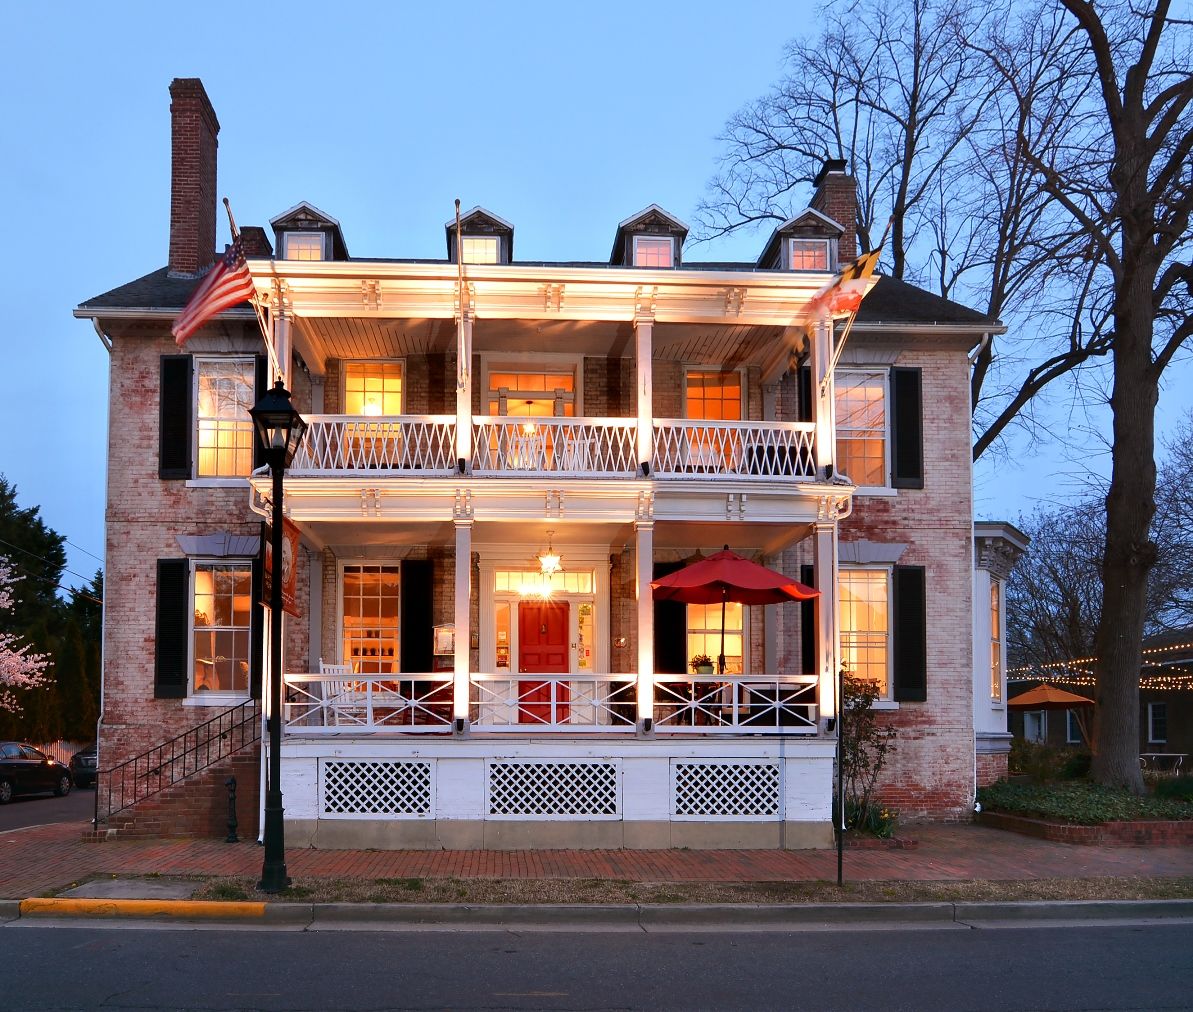 The Bartlett Pear Inn in Easton, Maryland, dates back to 1790. (Courtesy Eve Fishell)